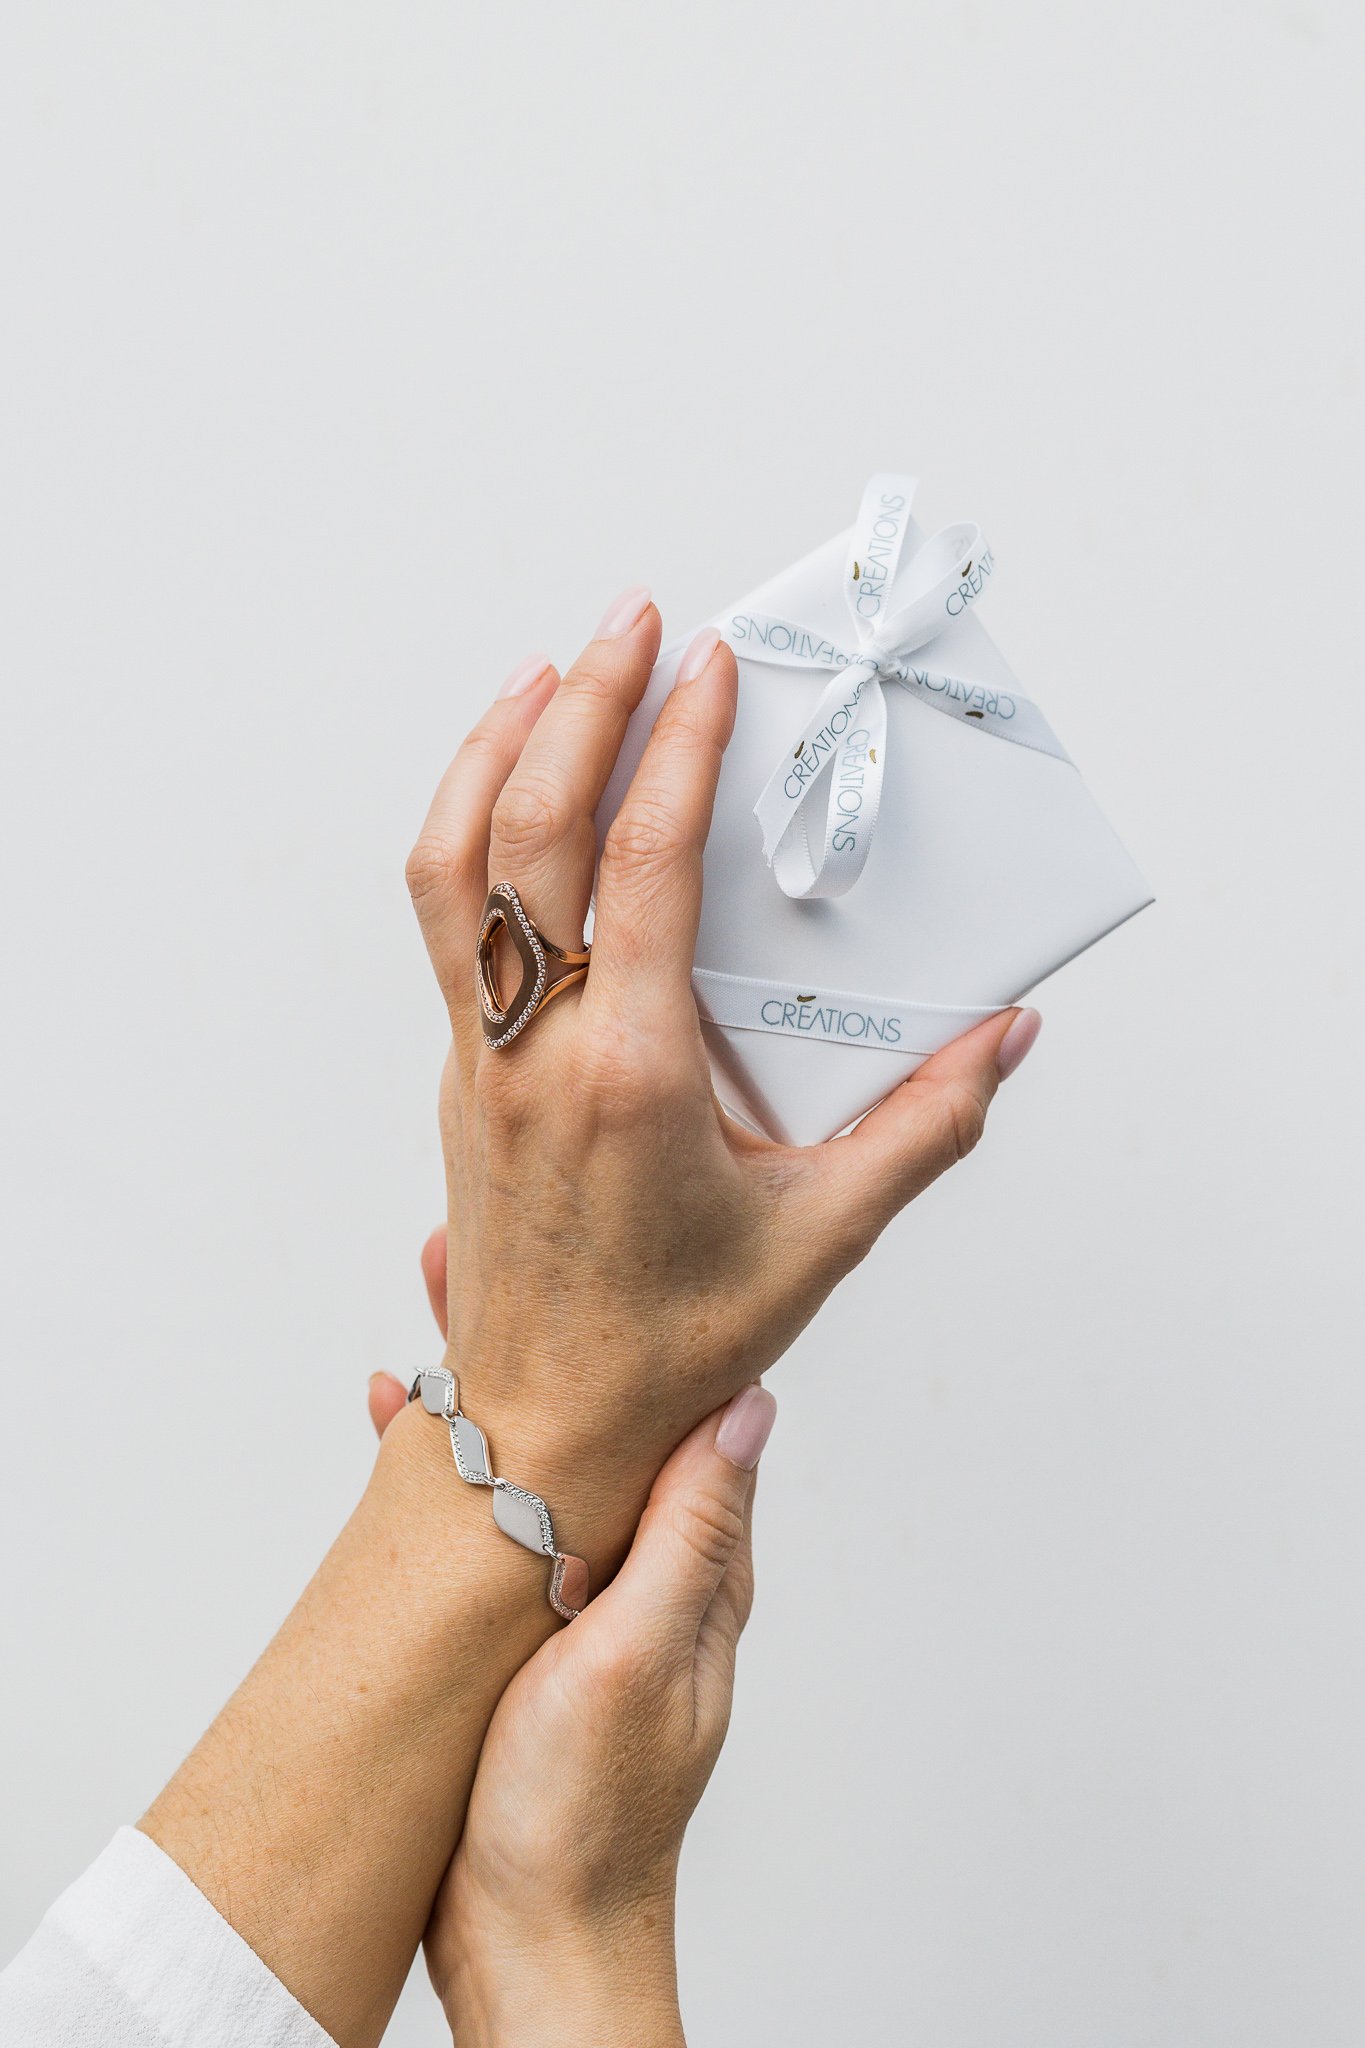 Canberra product photographer - hands hold gift box